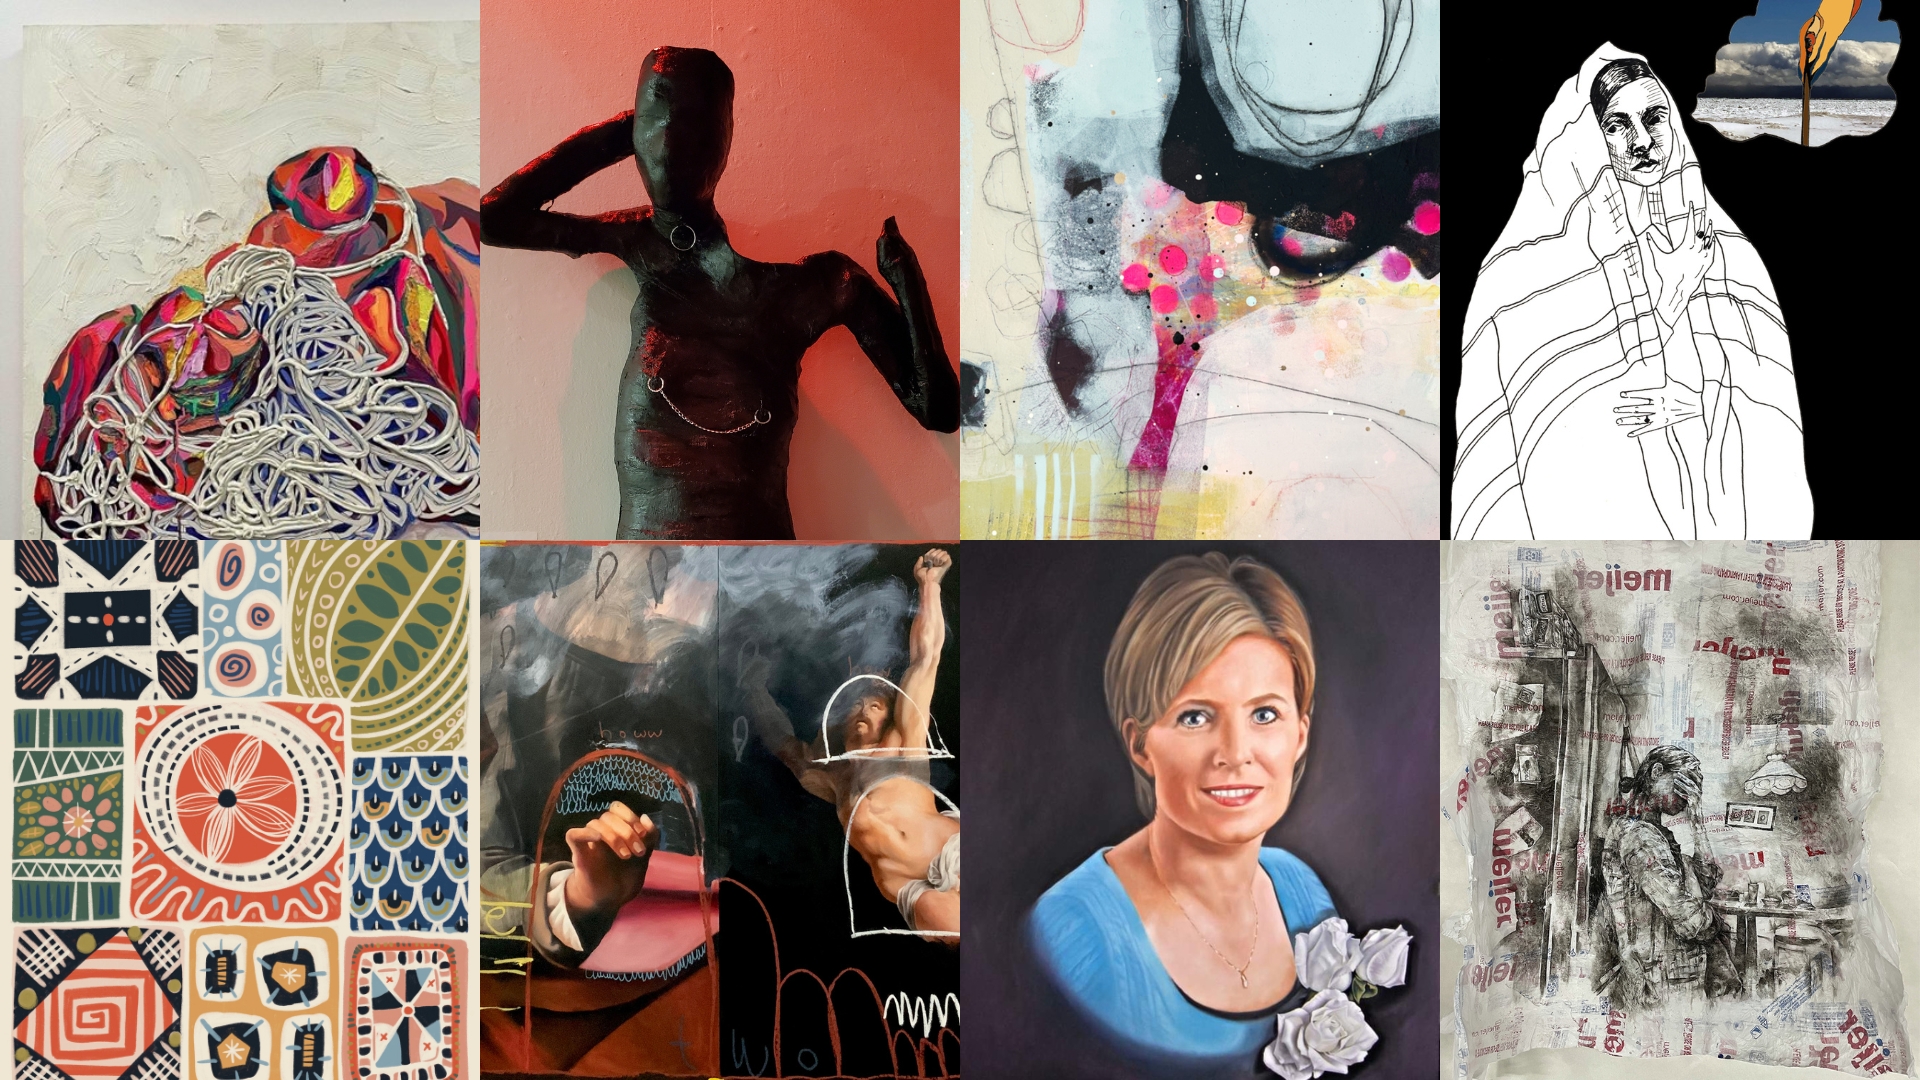 A collage of various artworks, including a portrait of a woman.